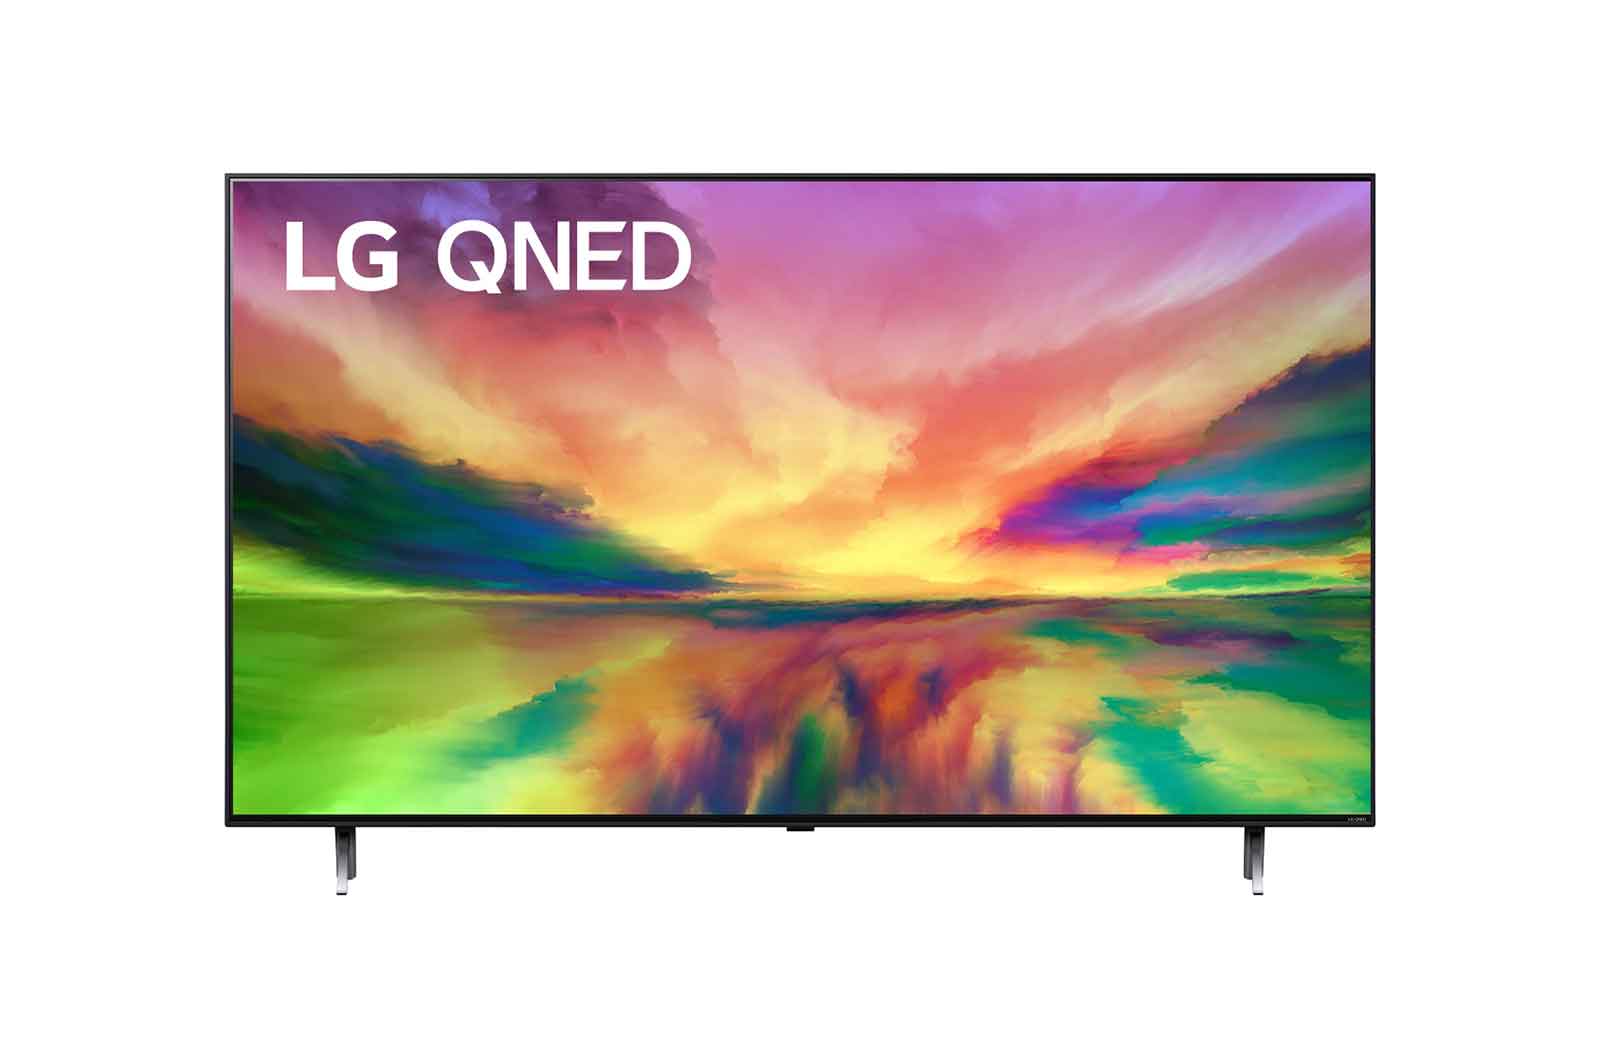 LG QNED TV QNED80 75 (189cm) 4K Smart TV | TV Wall Design | WebOS | ThinQ AI | AI Picture Pro, 75QNED80SRA